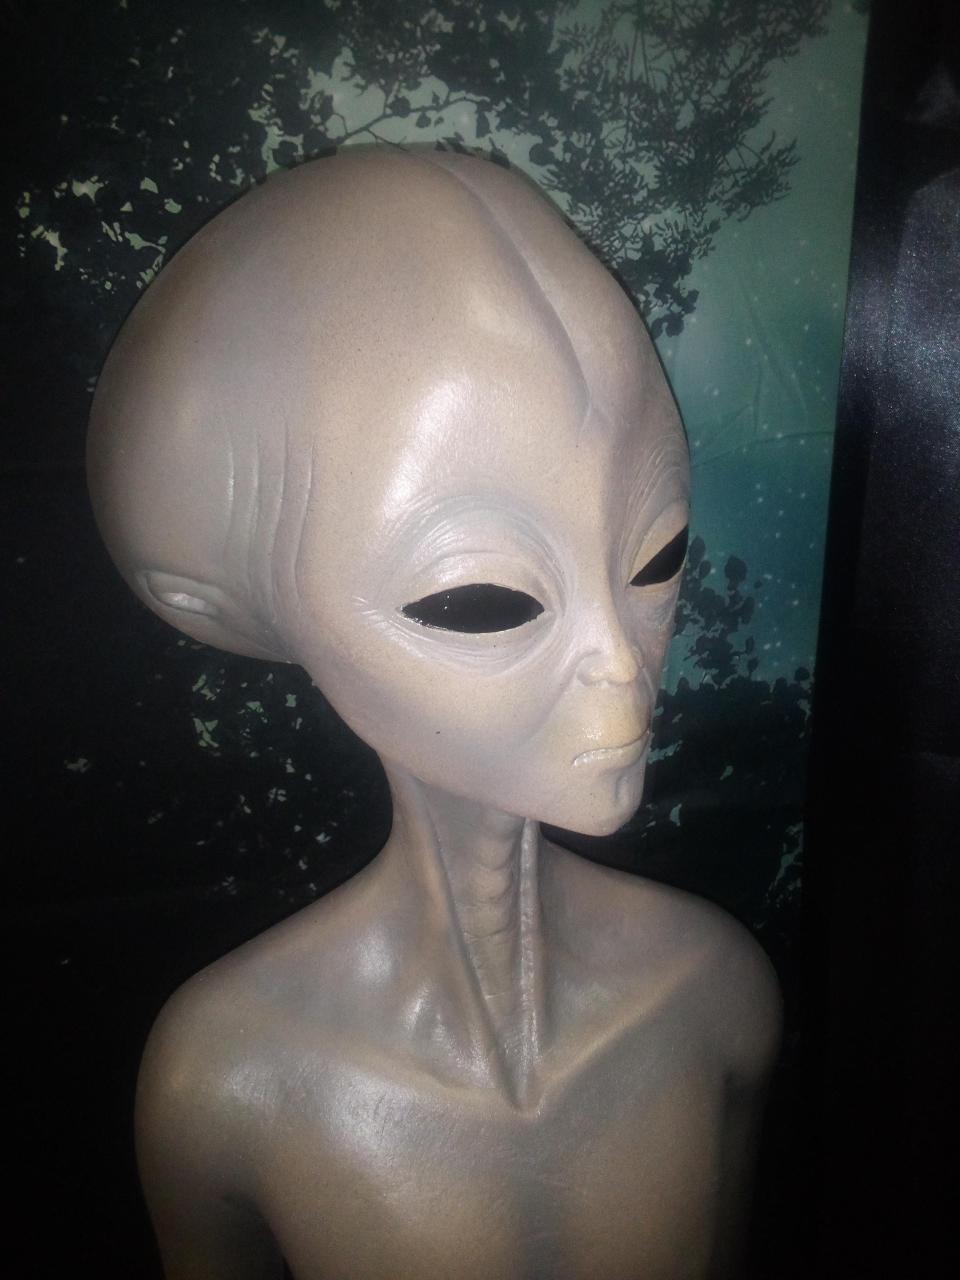 An alien on display at the newly opened Education Earth Museum in Athol.